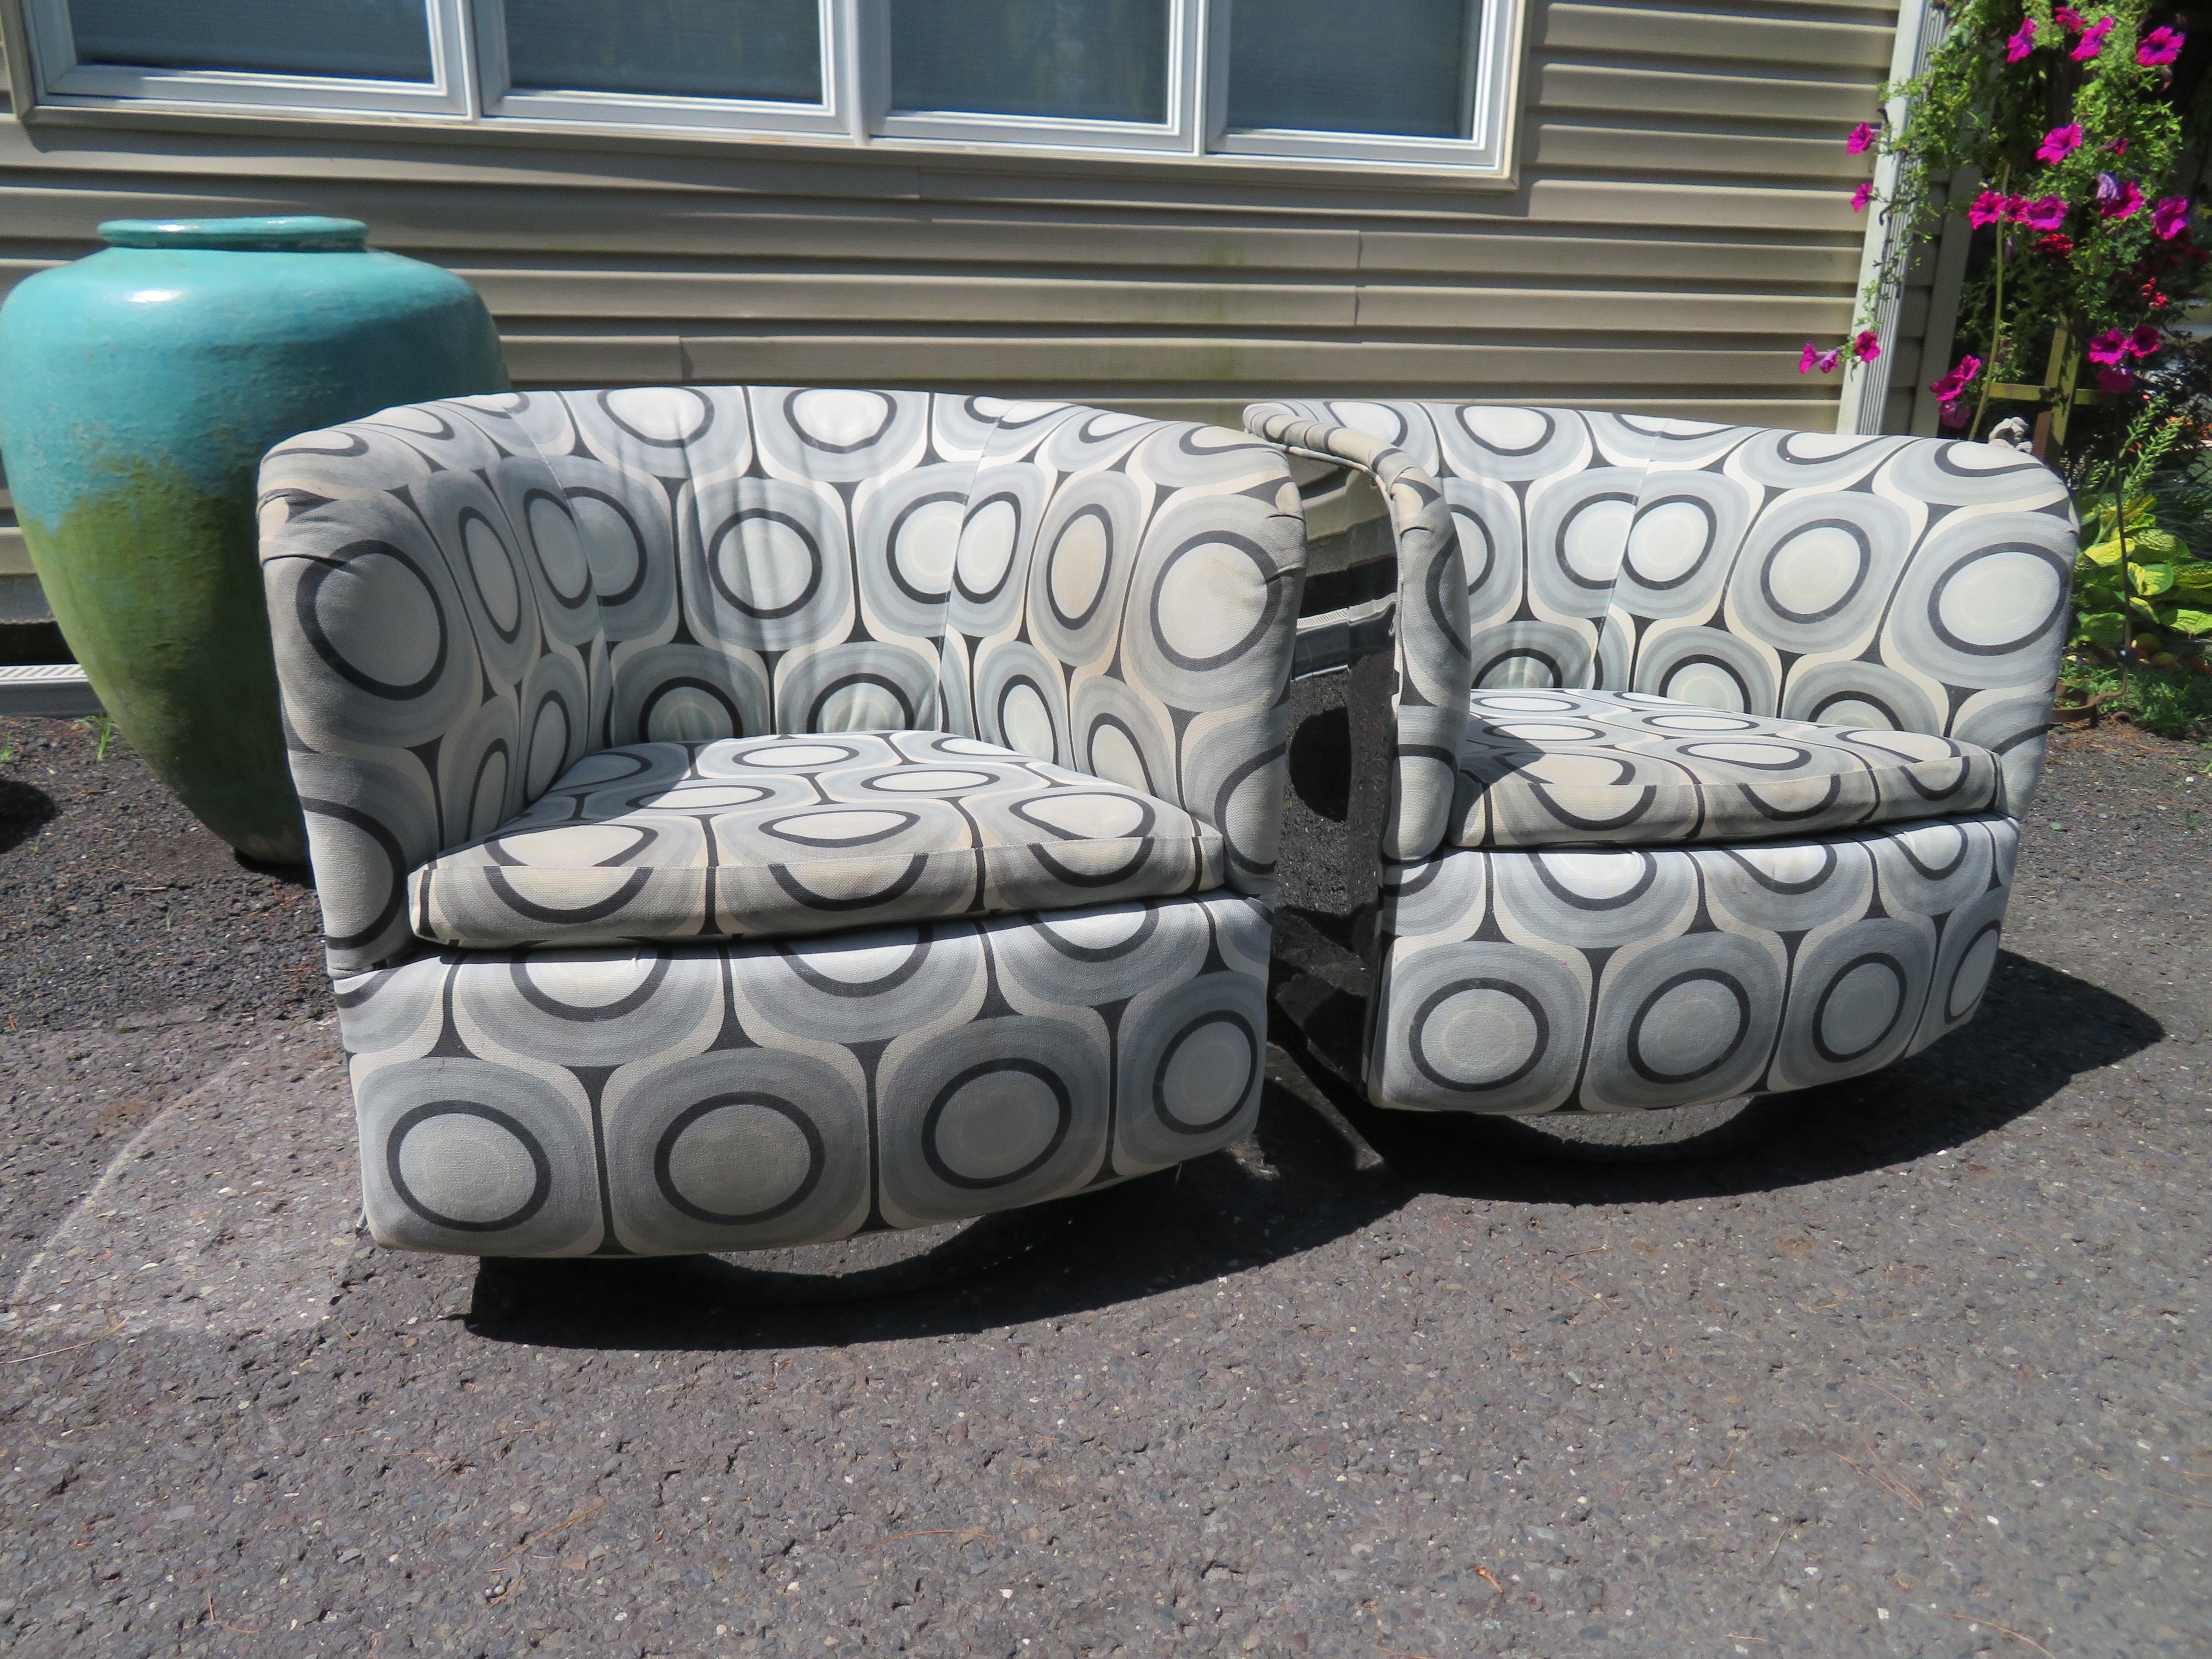 Amazing pair of chrome-clad Milo Baughman barrel back swivel rocker chairs. These are the Holy grail of Milo Baughman's designs and are in nice vintage condition. The upholstery is original and will need to be re-upholstered. These are super